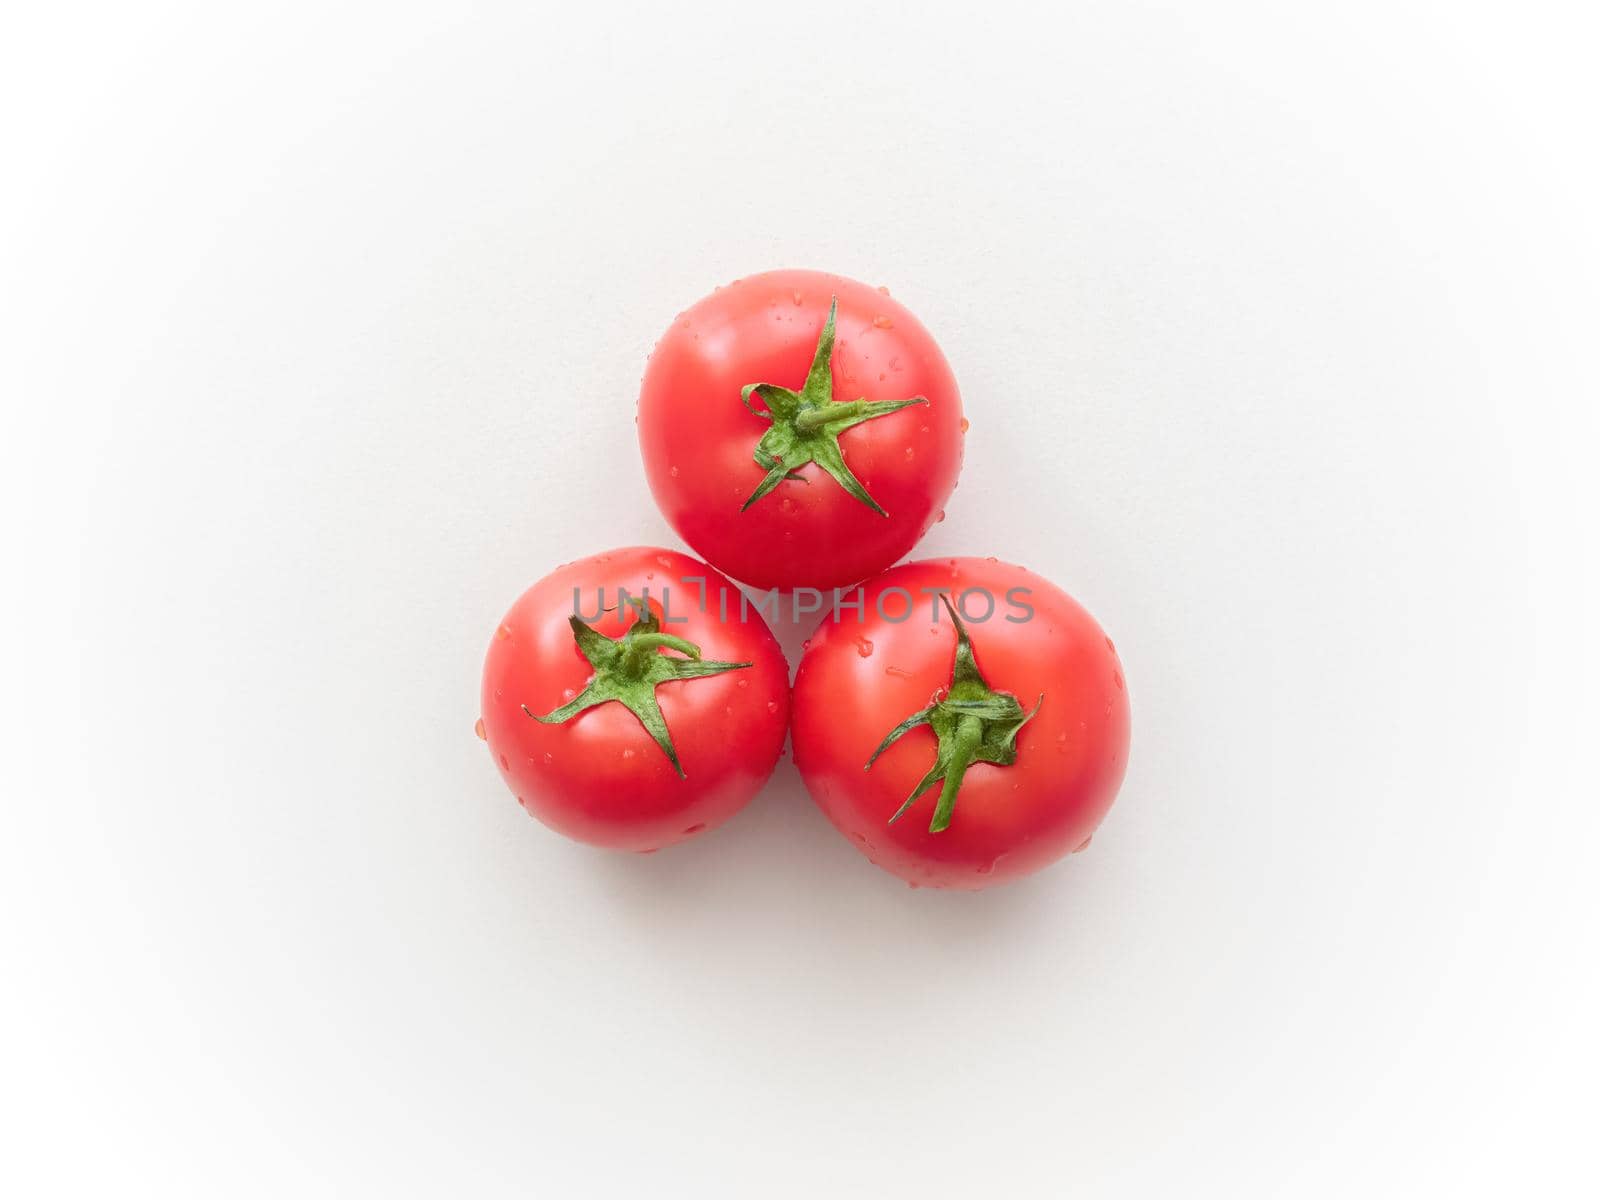 Three ripe tomatoes on a light gray ceramic surface. Top view. Not isolated